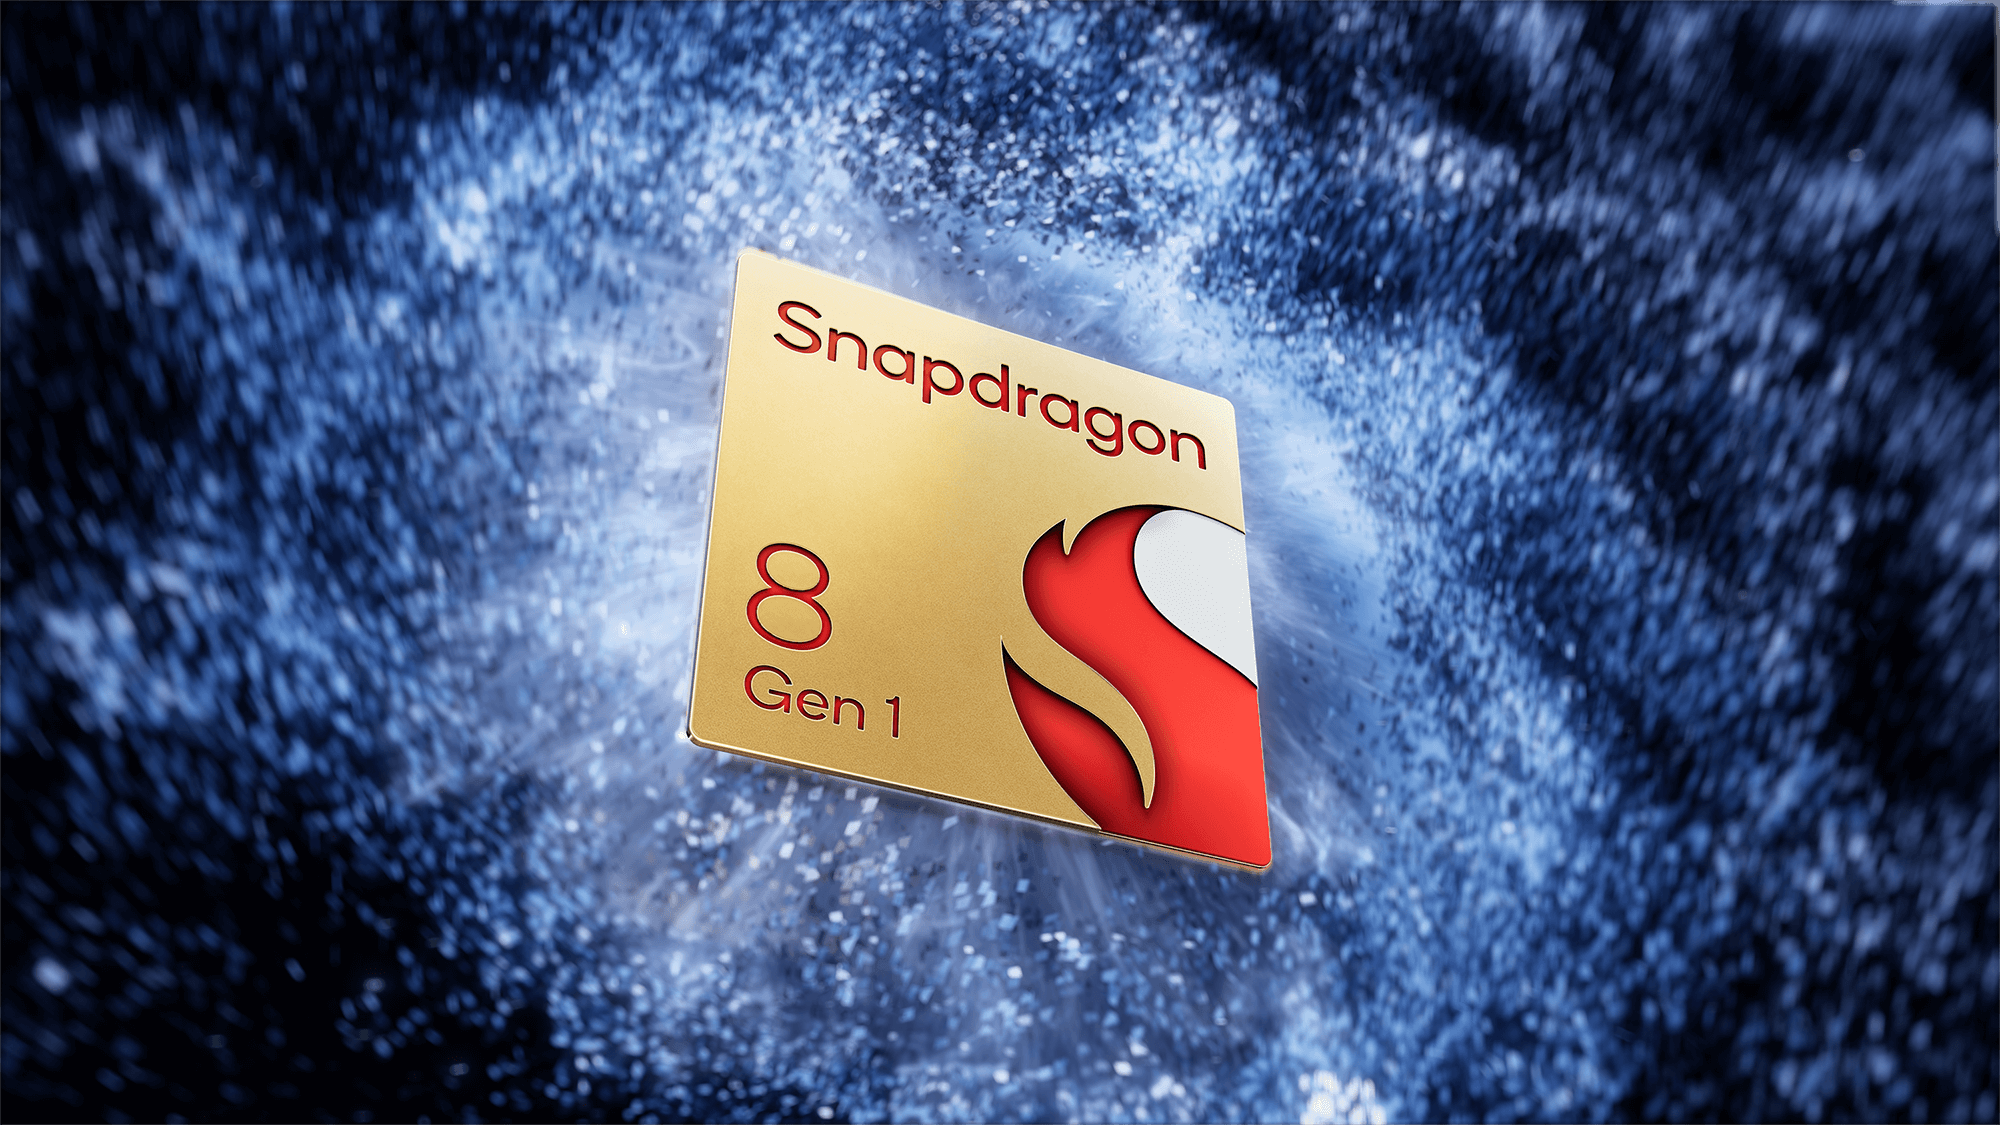 Qualcomm's Snapdragon 8 Gen 1 SoC looks set to dramatically boost mobile  gaming performance | PC Gamer